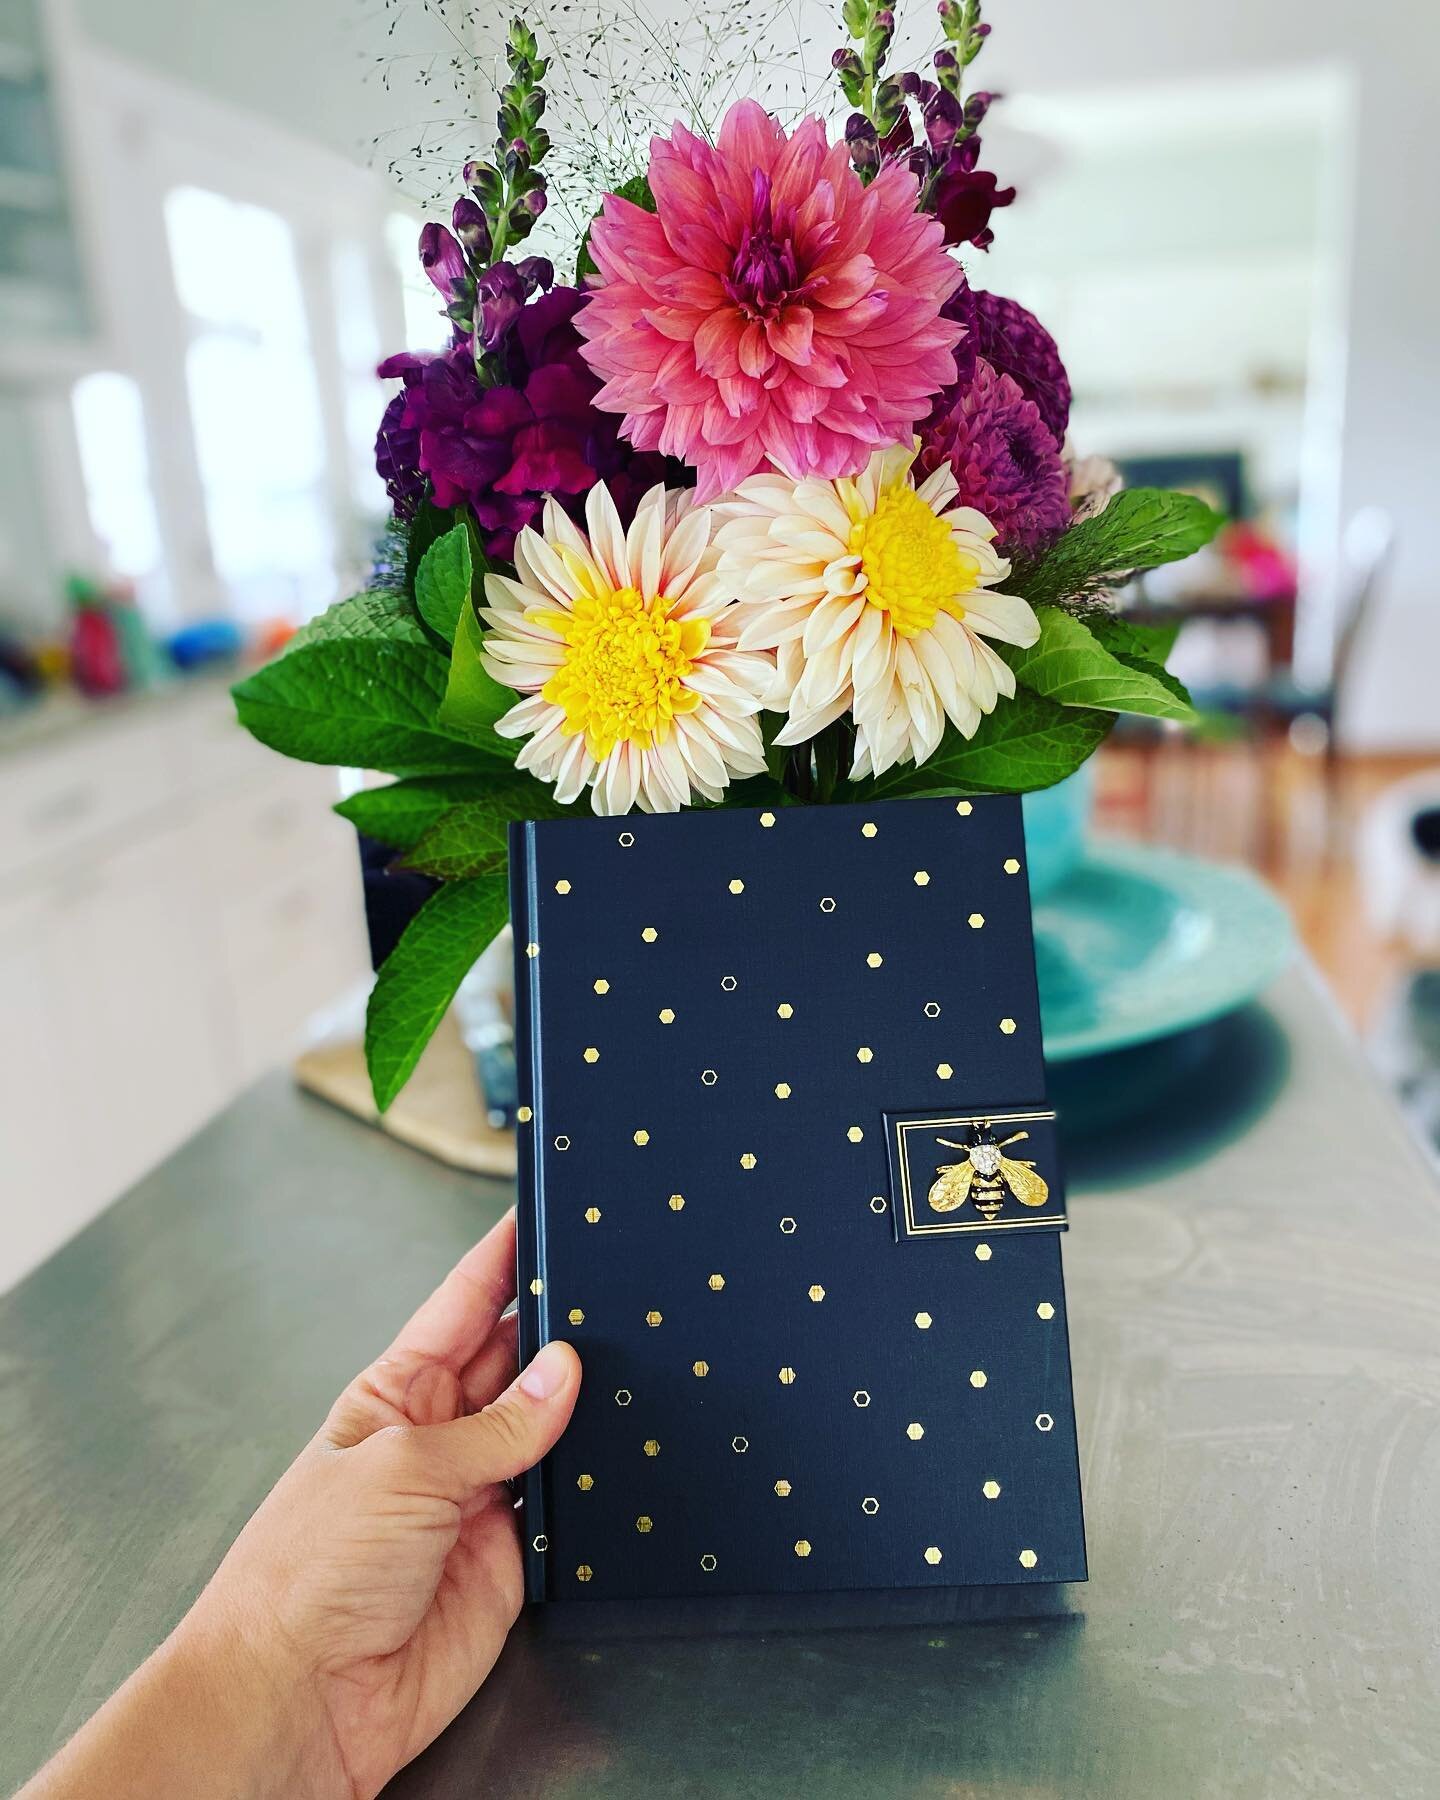 Who doesn&rsquo;t love prezzies? Sweetest bookstore owner @bowen_brandy at @watermarkbookco gave me this gorgeous bunch of locally grown dahlias 💐 and fab podcast host @mariwuellner at the awesome Living on Purpose podcast gifted me this darling bee